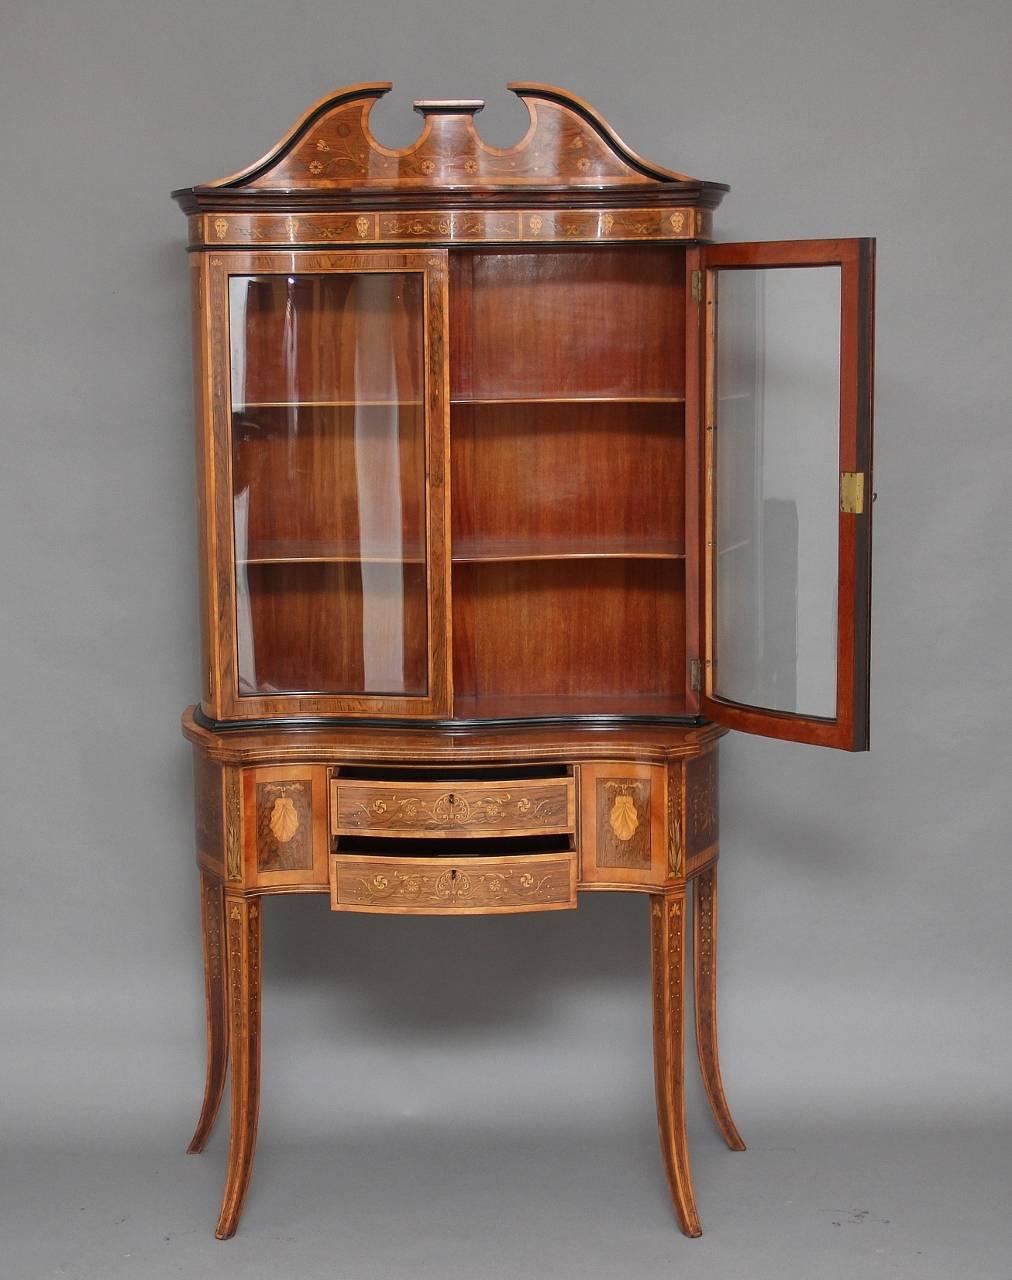 19th century Sheraton Revival rosewood display cabinet profusely inlaid all-over and crossbanded in satinwood, the top having a broken arch pediment and below the frieze decorated with inlaid male masks, with serpentine shaped doors and glass